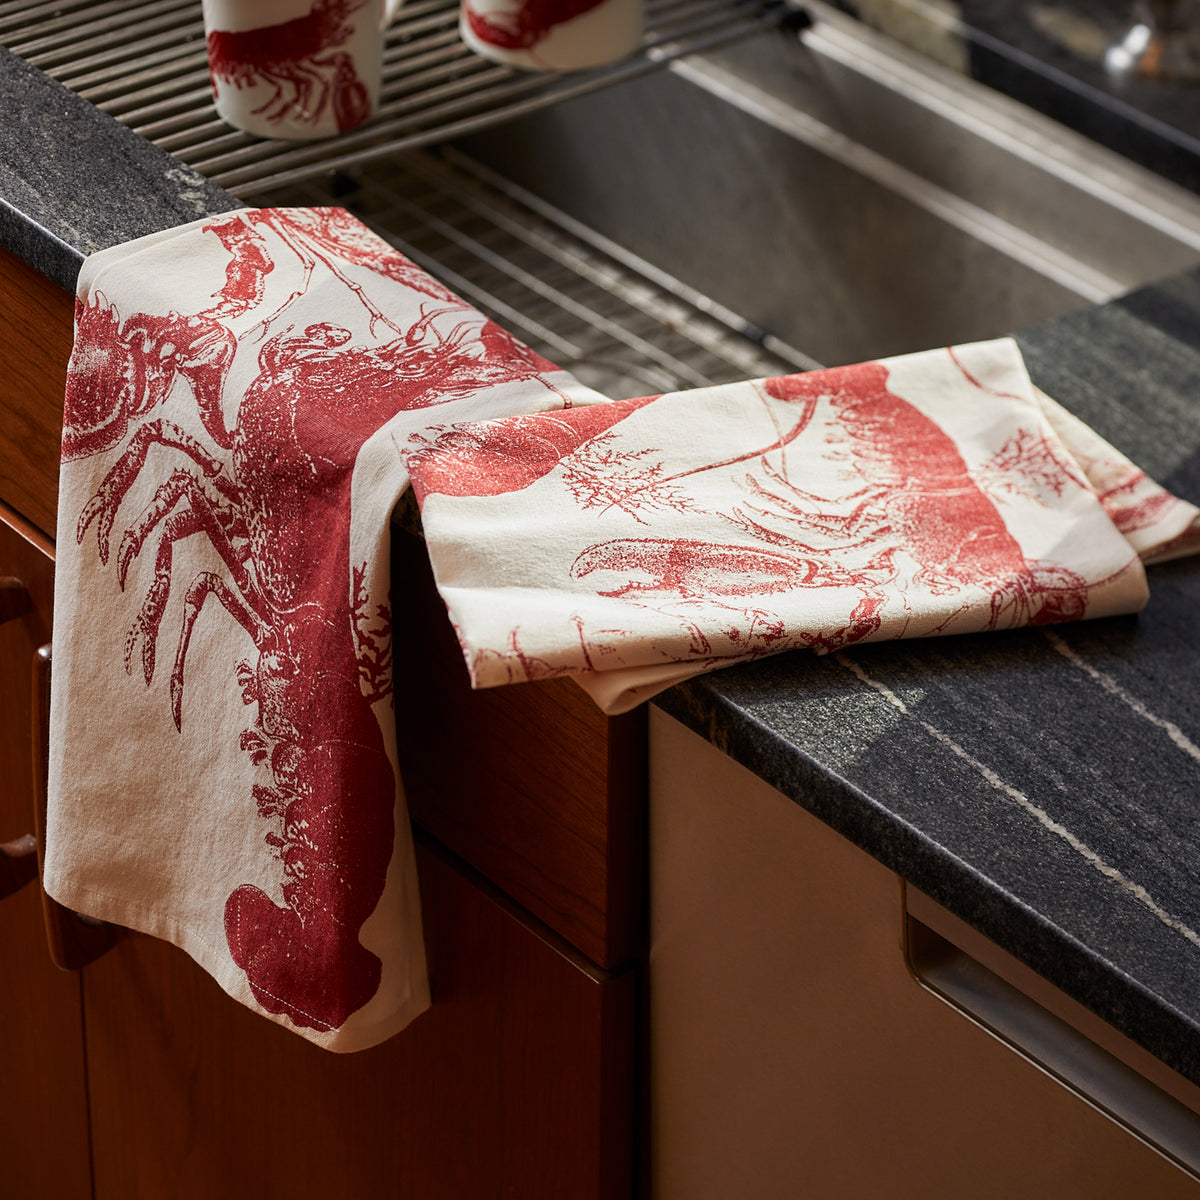 Two white July Fourth Bundle Kitchen Towels by Caskata, featuring red lobster prints, are draped over the edge of a kitchen sink and countertop.